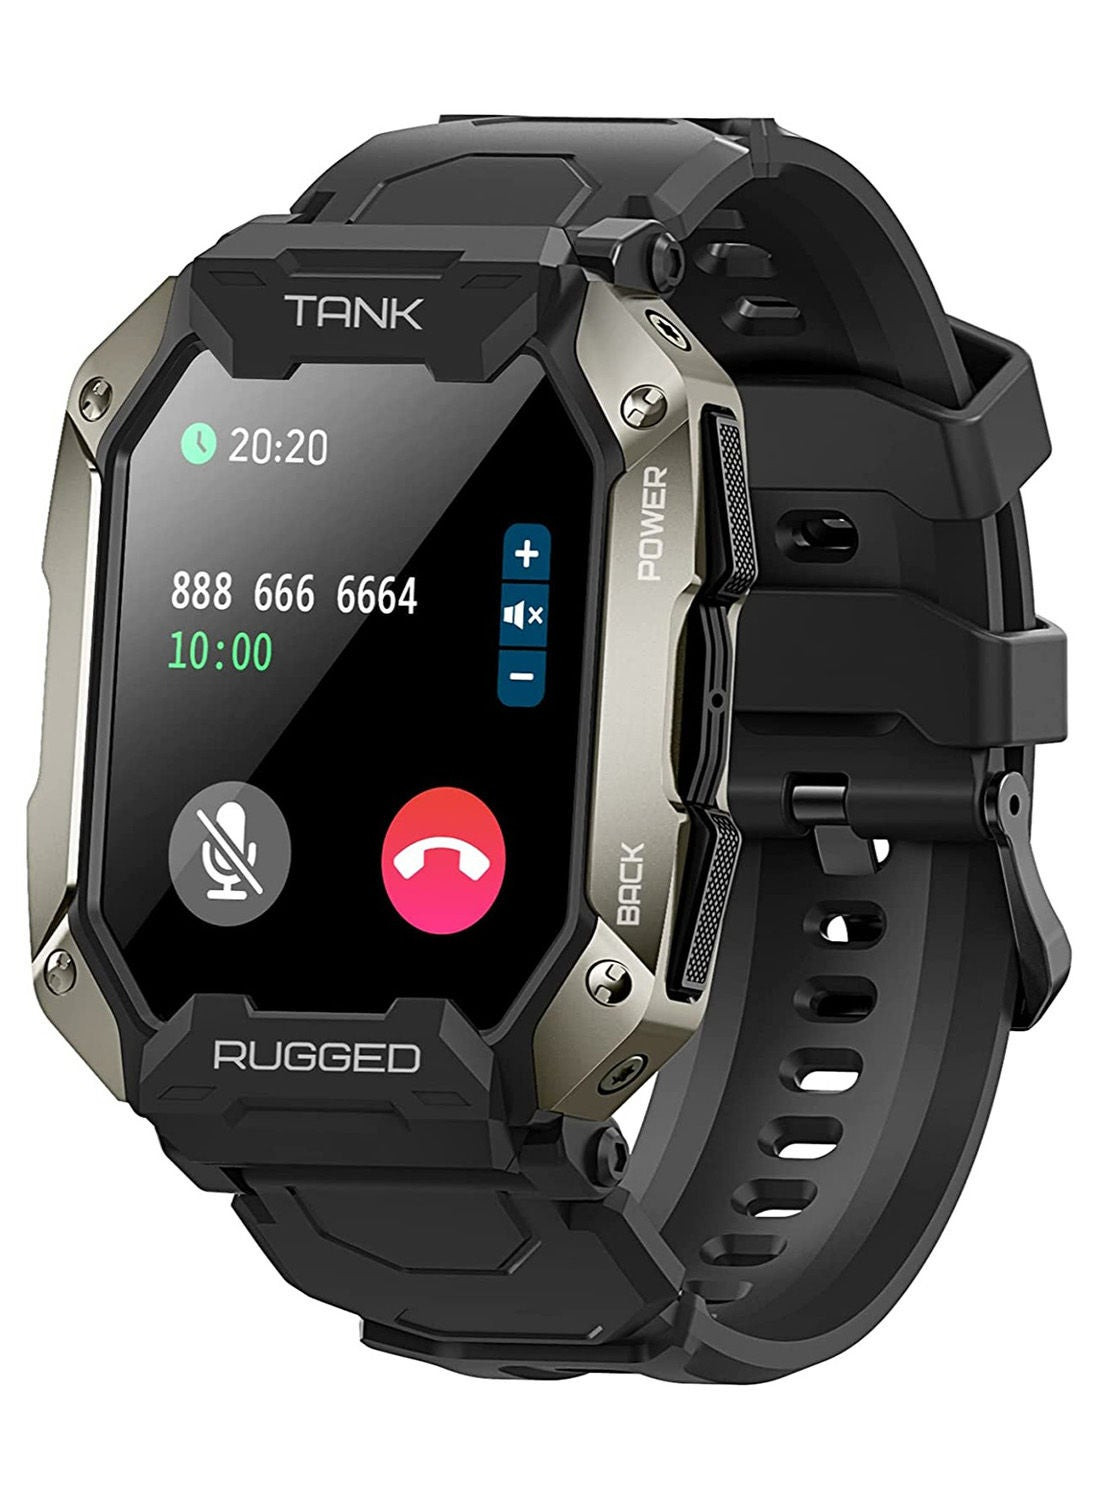 health fitness command, display, OLED notifications tracker, monitor, voice watch, Smart Bluetooth, water-resistant, GPS,